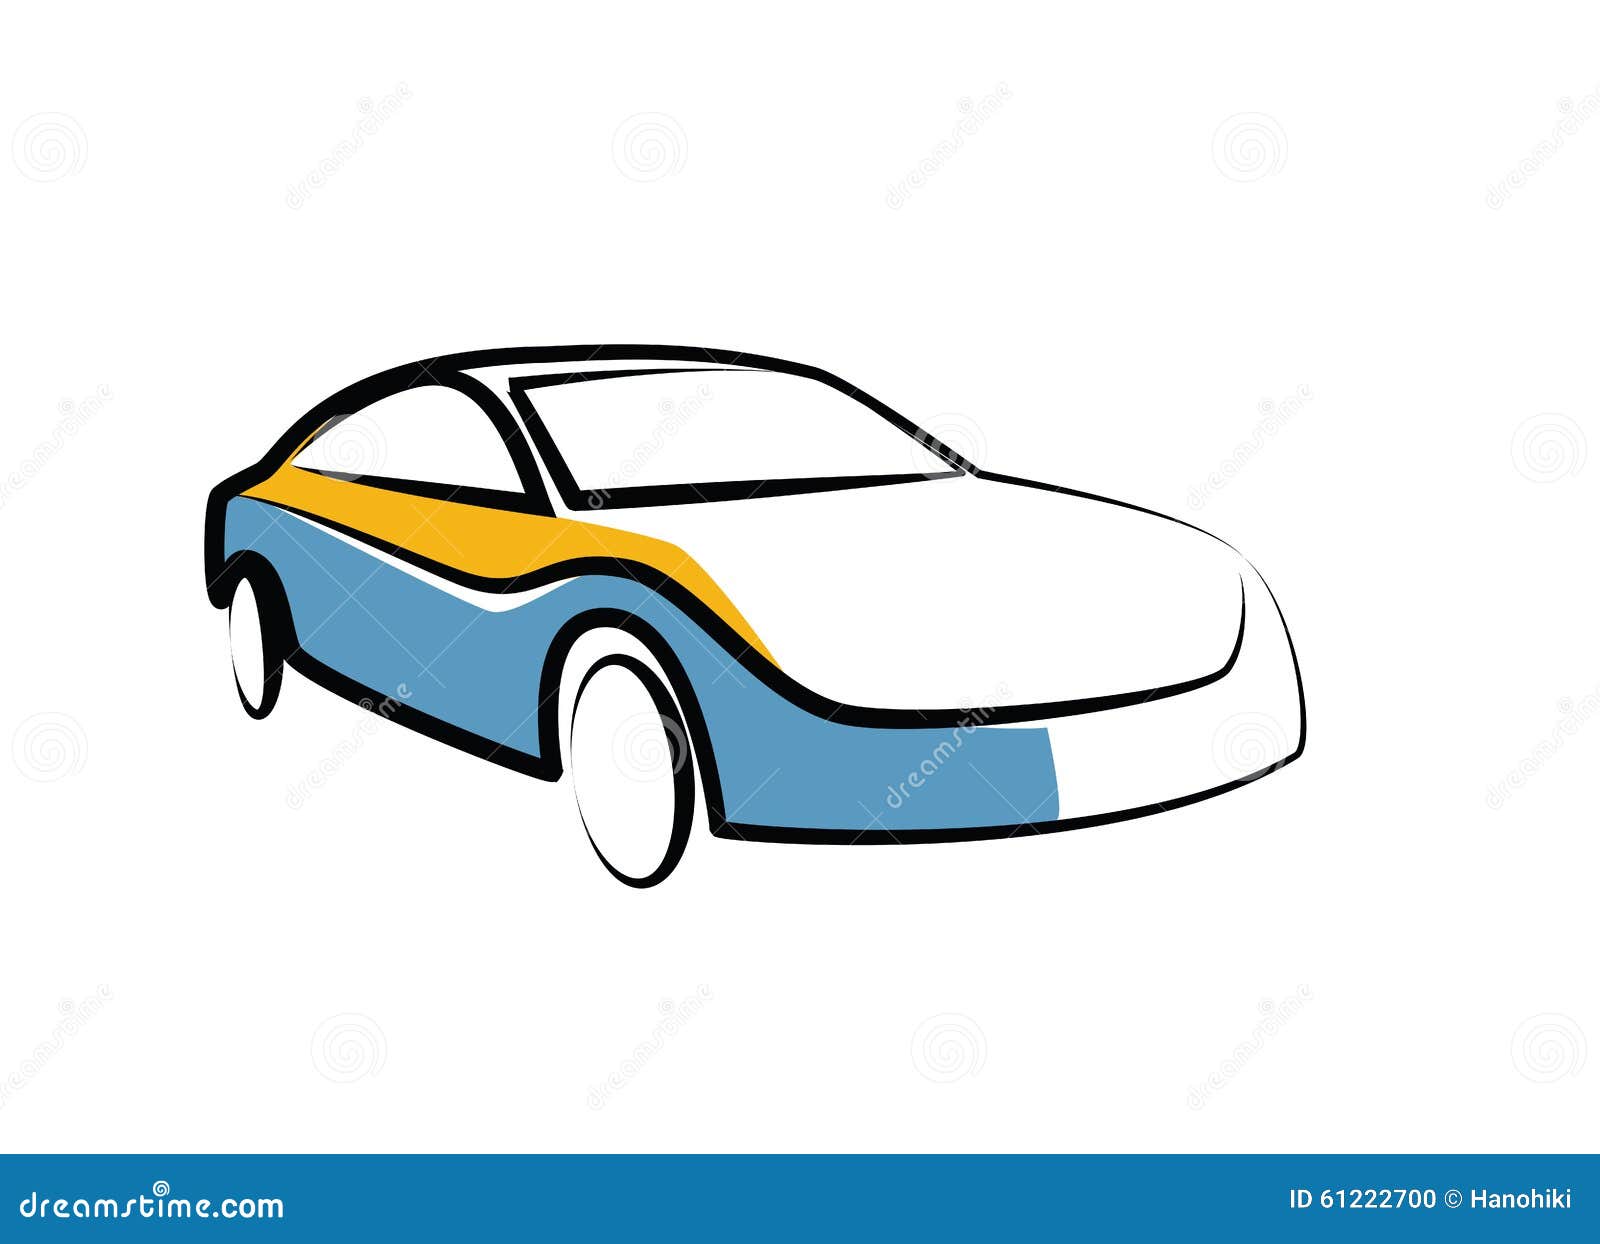 How To Draw Bmw Car Step By Step - Bmw Sports Car Drawing - How To Draw A Car  Easy - YouTube